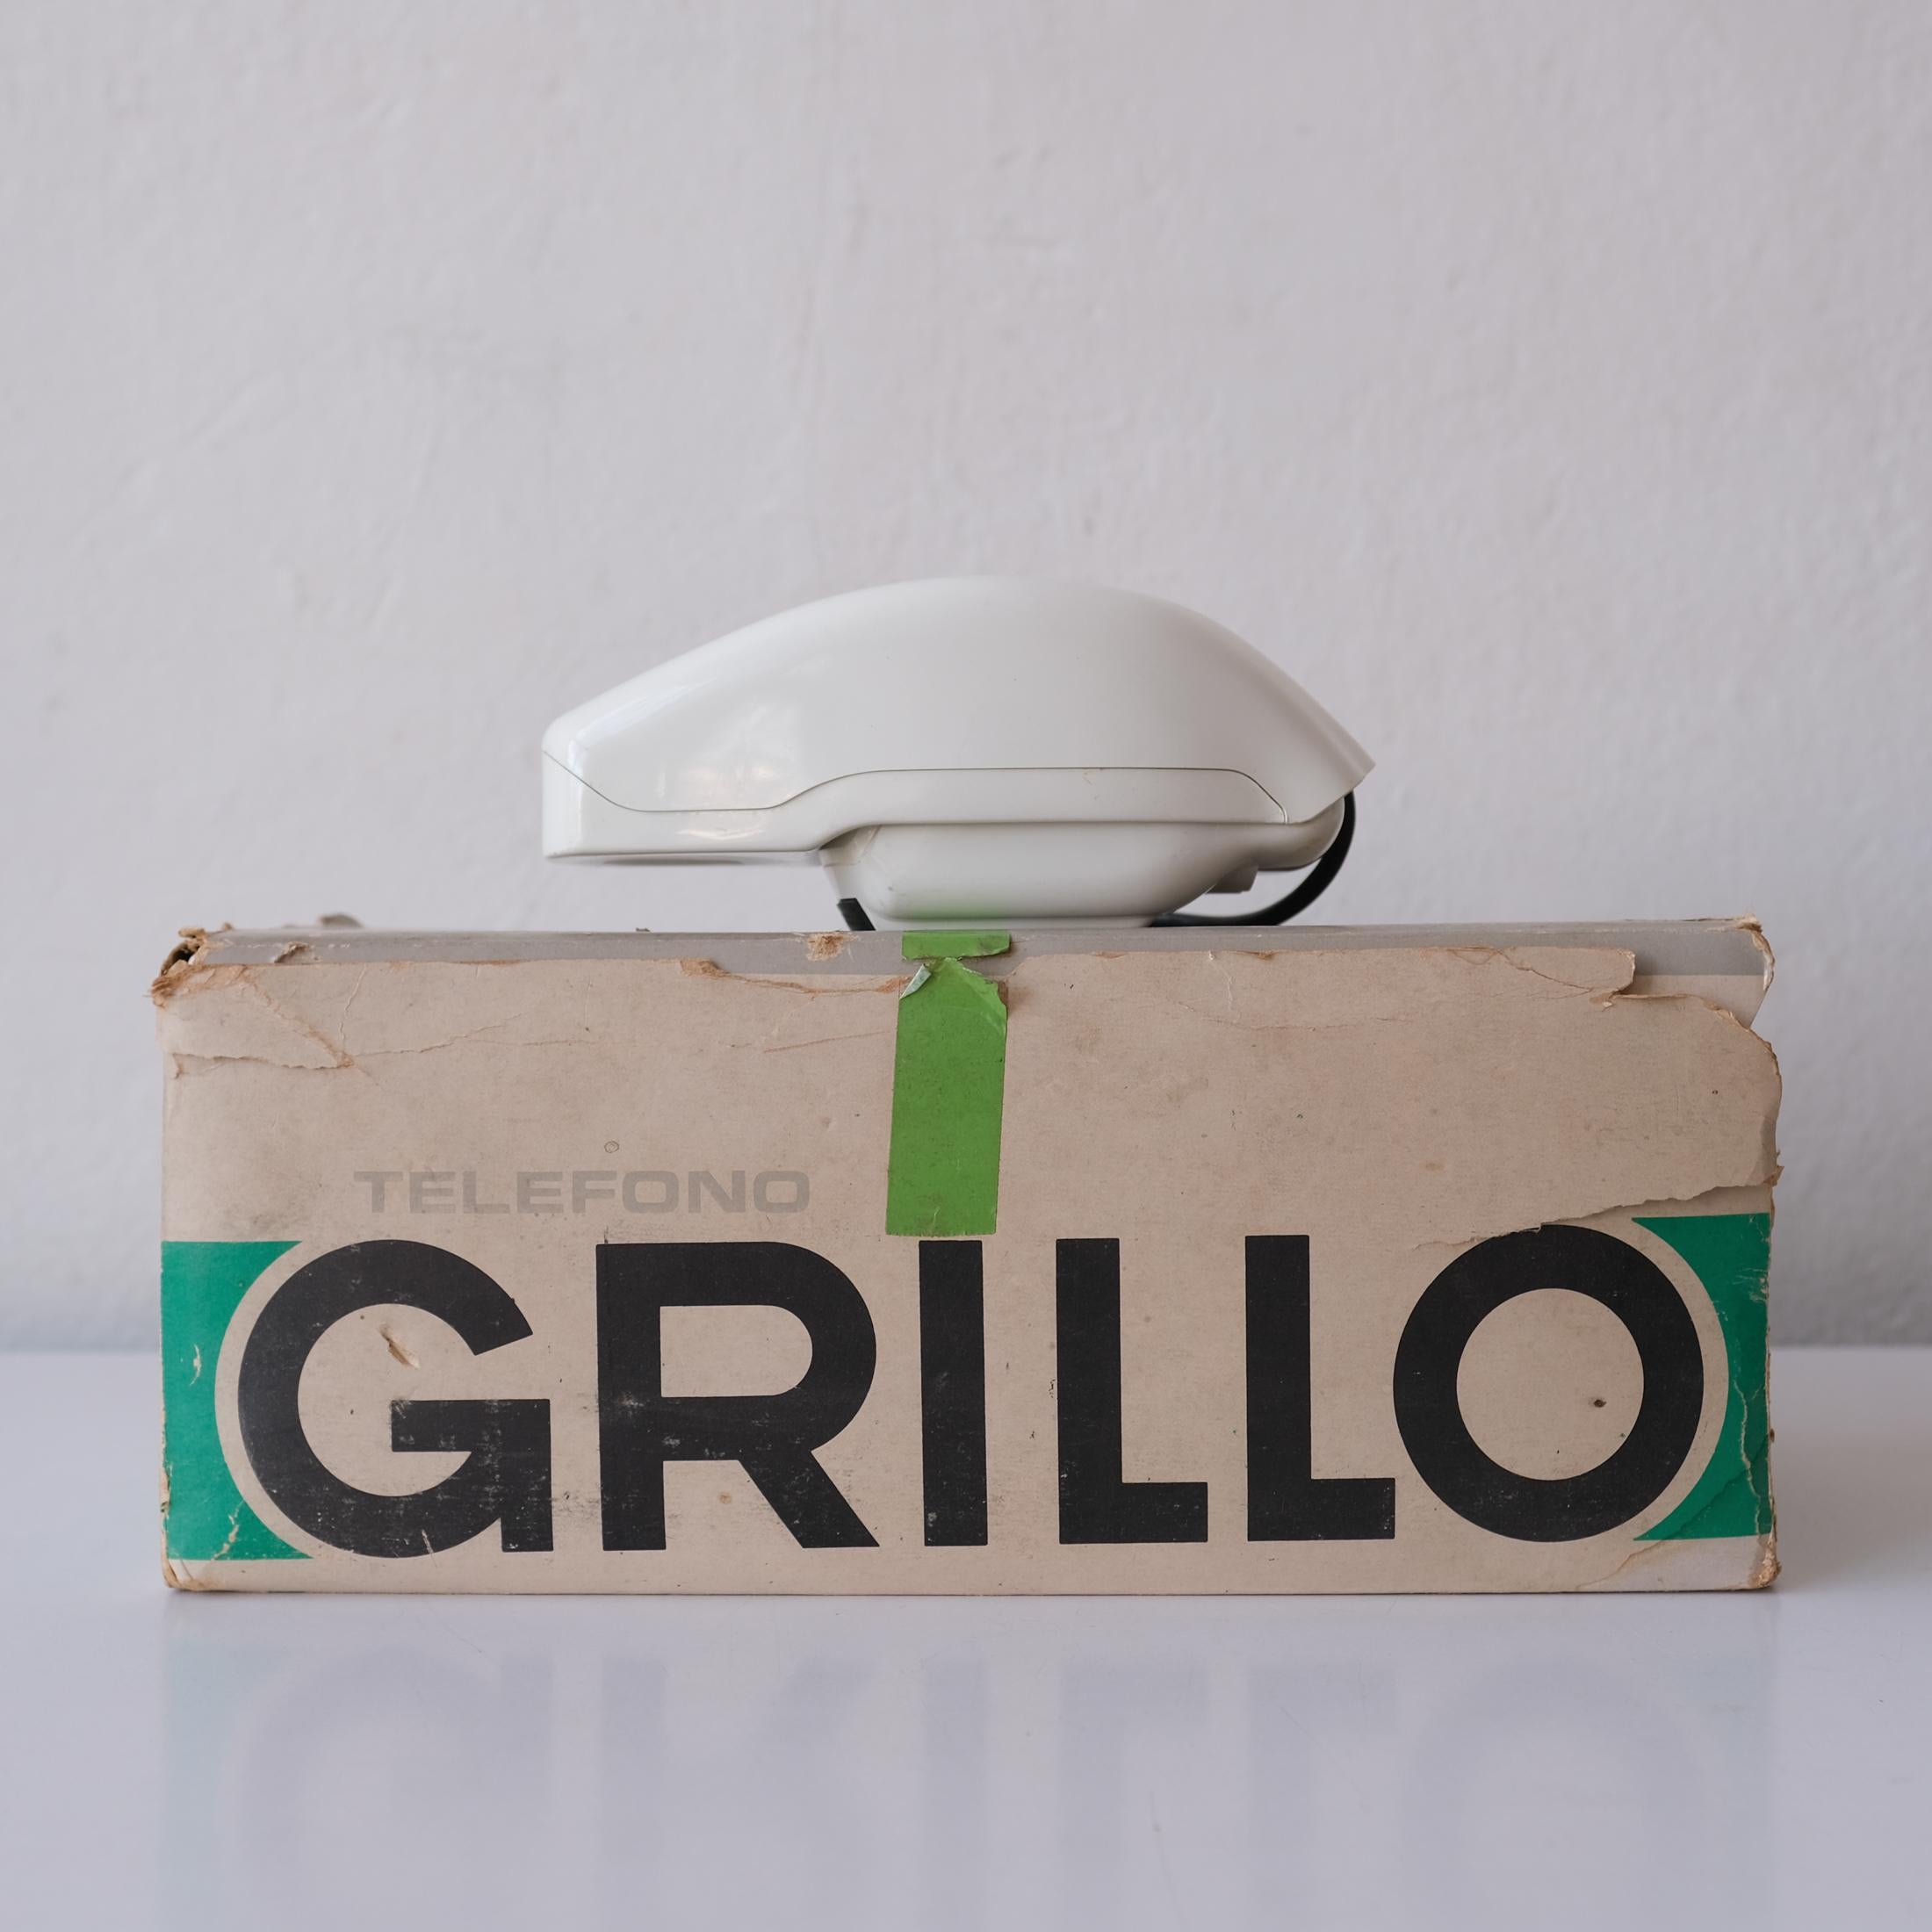 Grillo (Cricket) folding telephone by Marco Zanuso Richard Sapper with the original box from 1966. Part of the MoMA New York permanent collection. A revolutionary space age modern design and perhaps the first flip phone. Very rare example with the